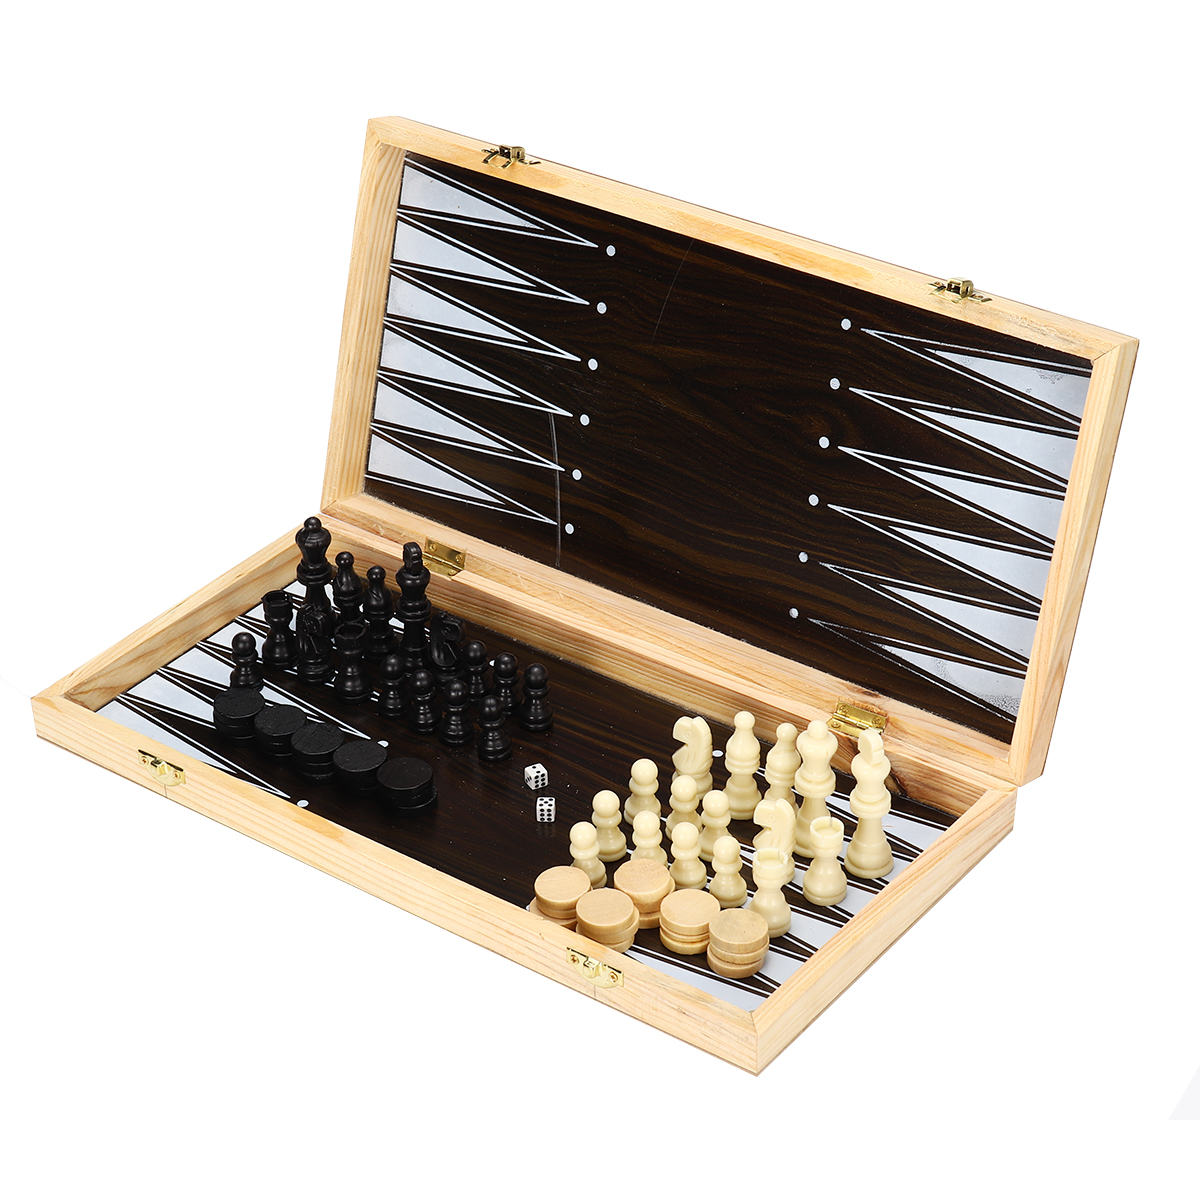 3-in-1-Folding-Wood-Chess-Set-Game-Checkers-Draughts-Backgammon-Toy-Intelligence-Development-for-Kid-1809193-5